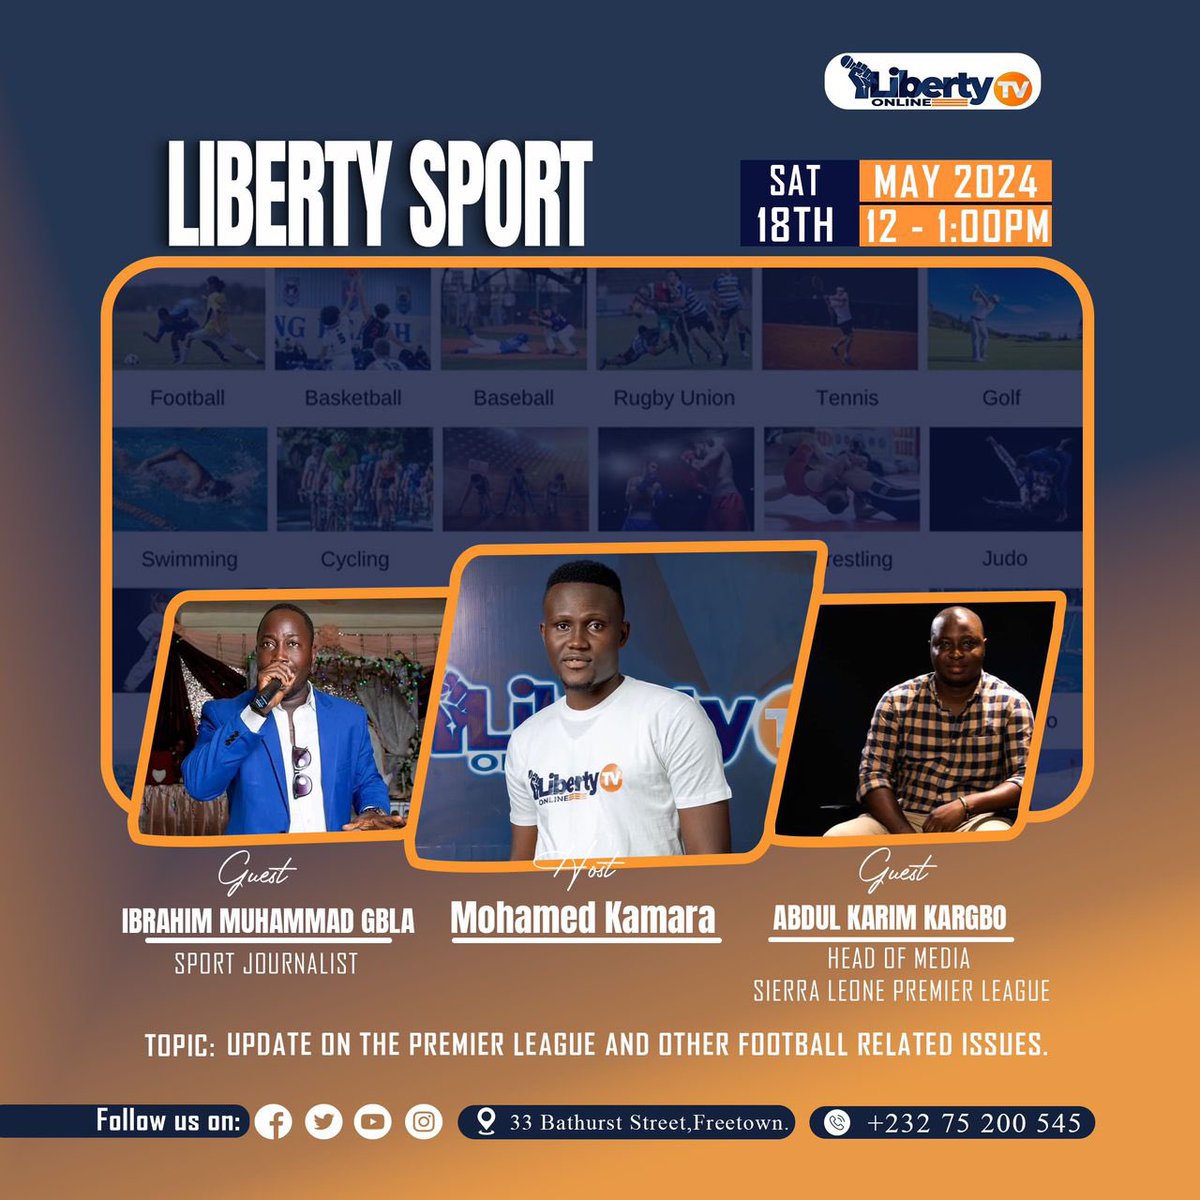 In today’s episode of the Liberty Sport Program, we will be hosting a discussion on the preparation of the second phase of the Leonerock Premier League. Get the latest sports news, commentary, gossip, transfers, and other exciting sports happenings by tuning in at midday. #SL